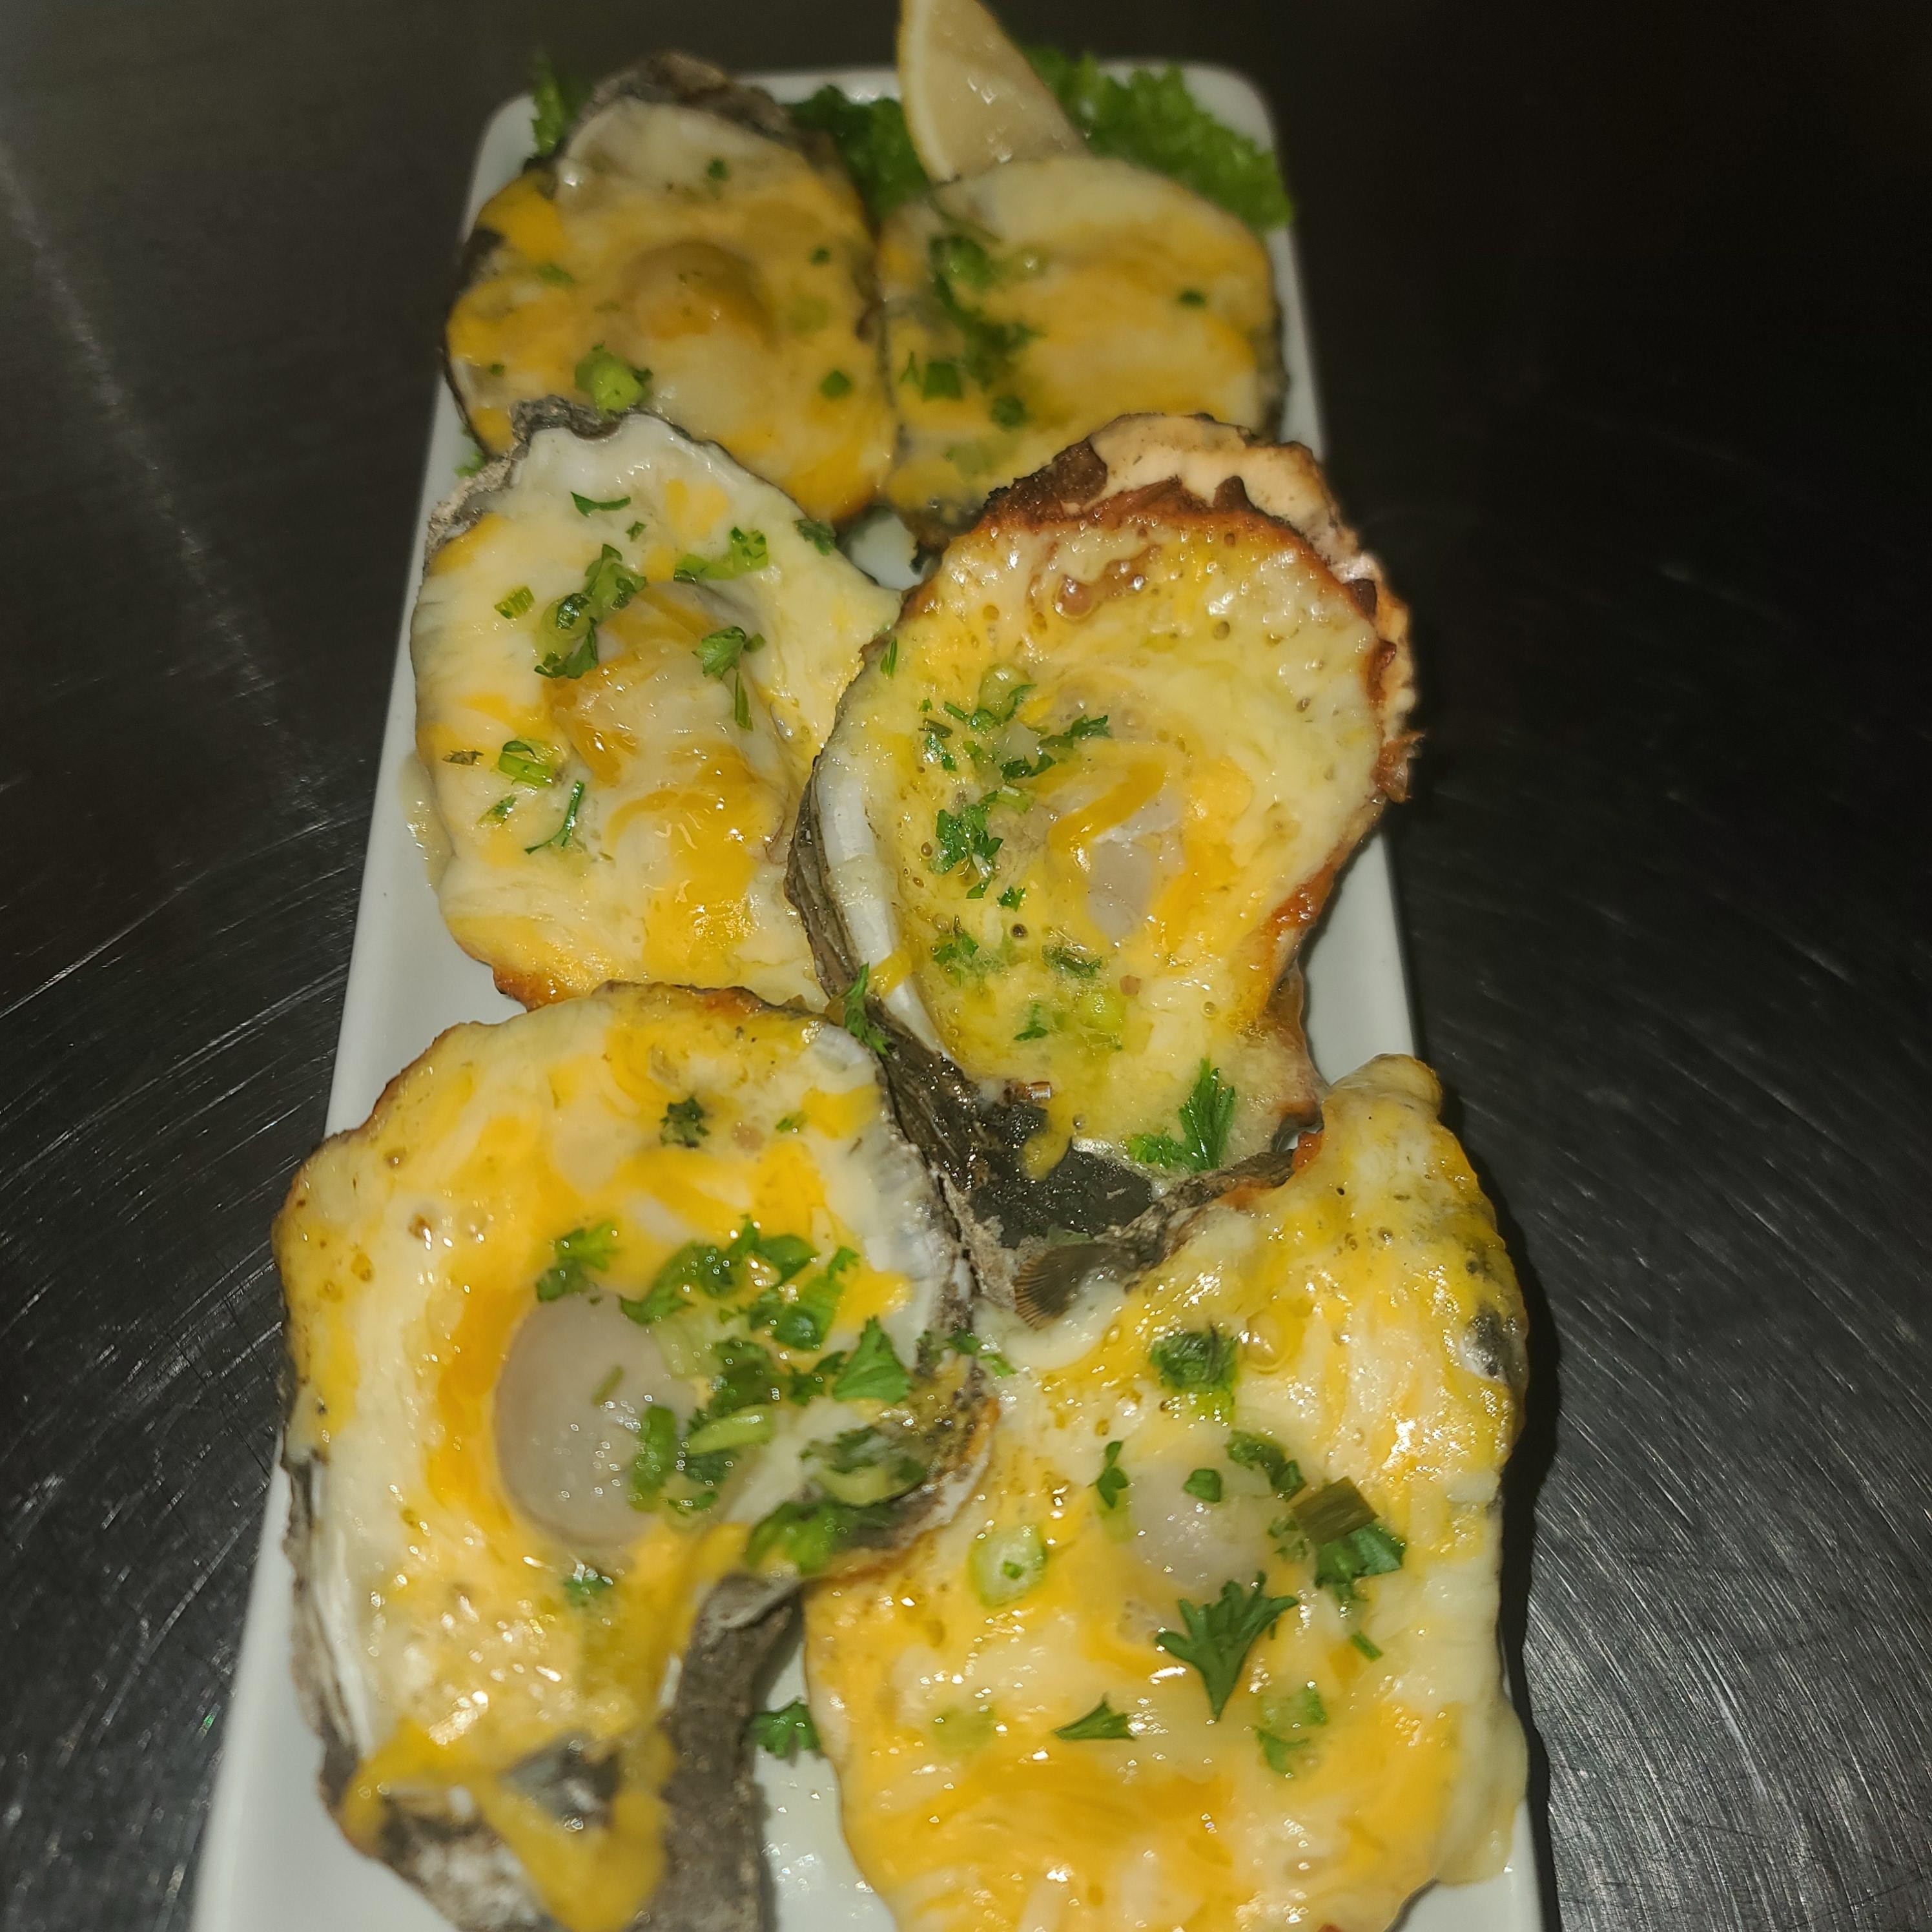 CHARRED-GRILLED OYSTERS